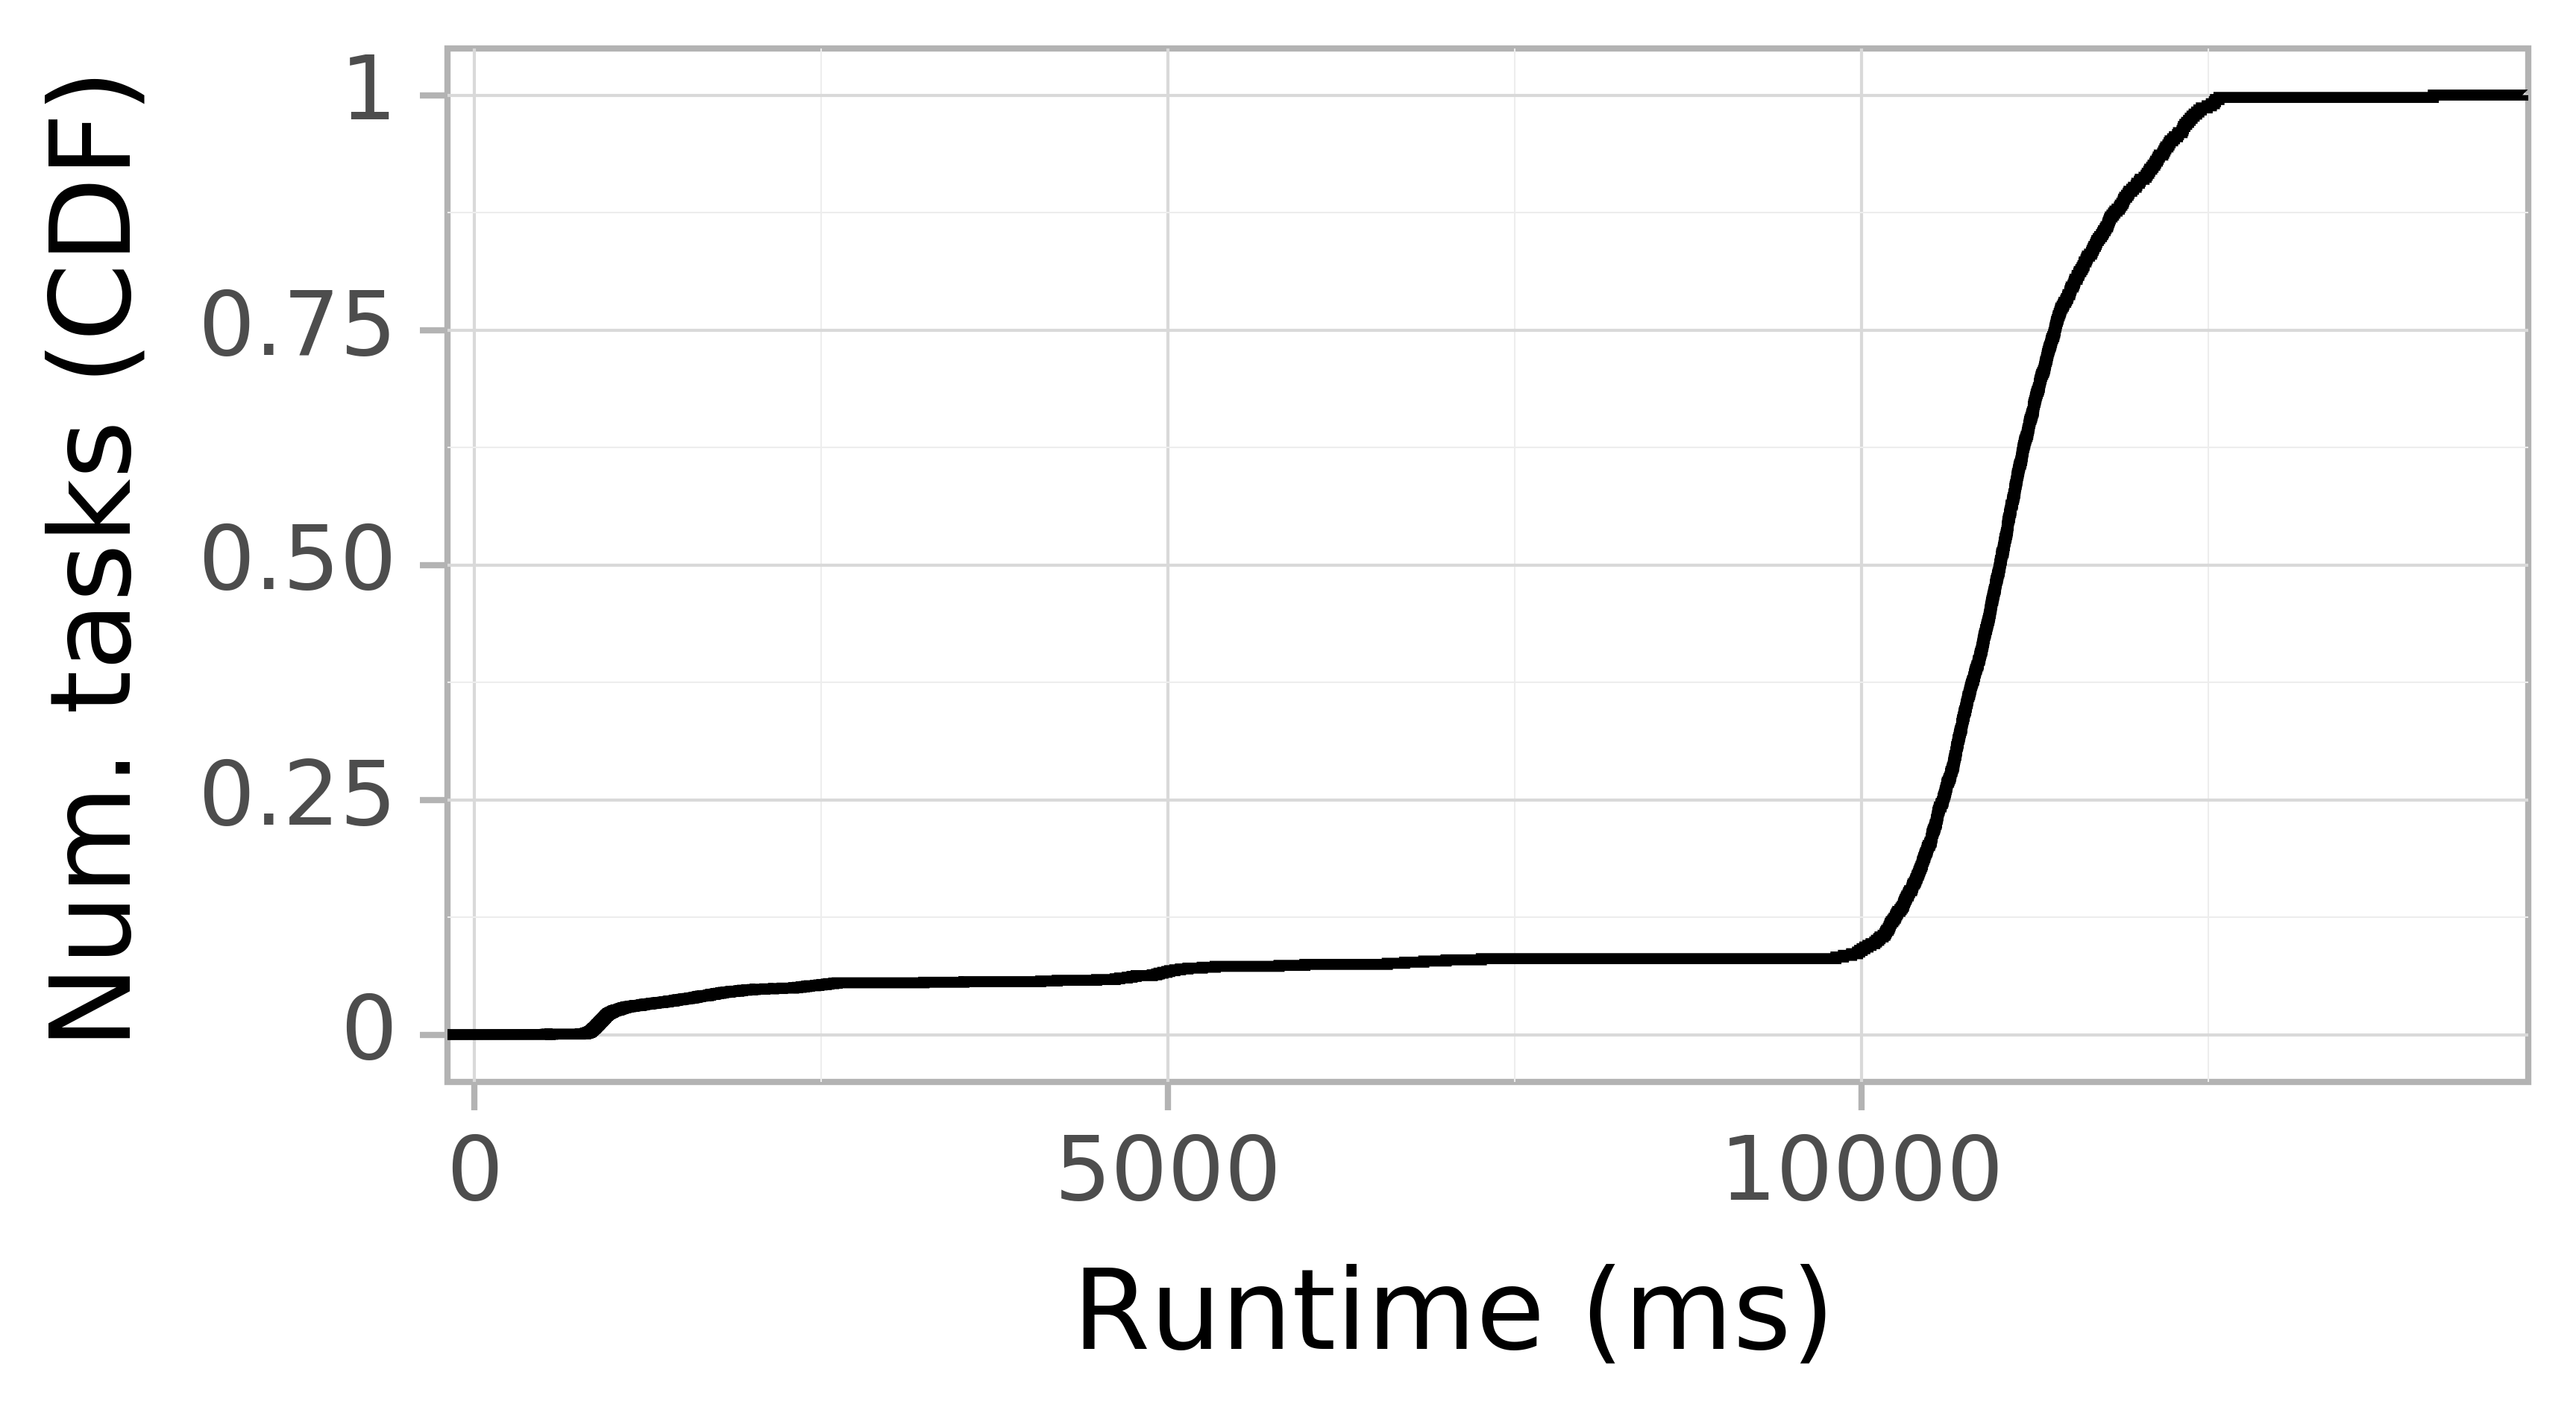 Task runtime CDF graph for the askalon-new_ee50 trace.